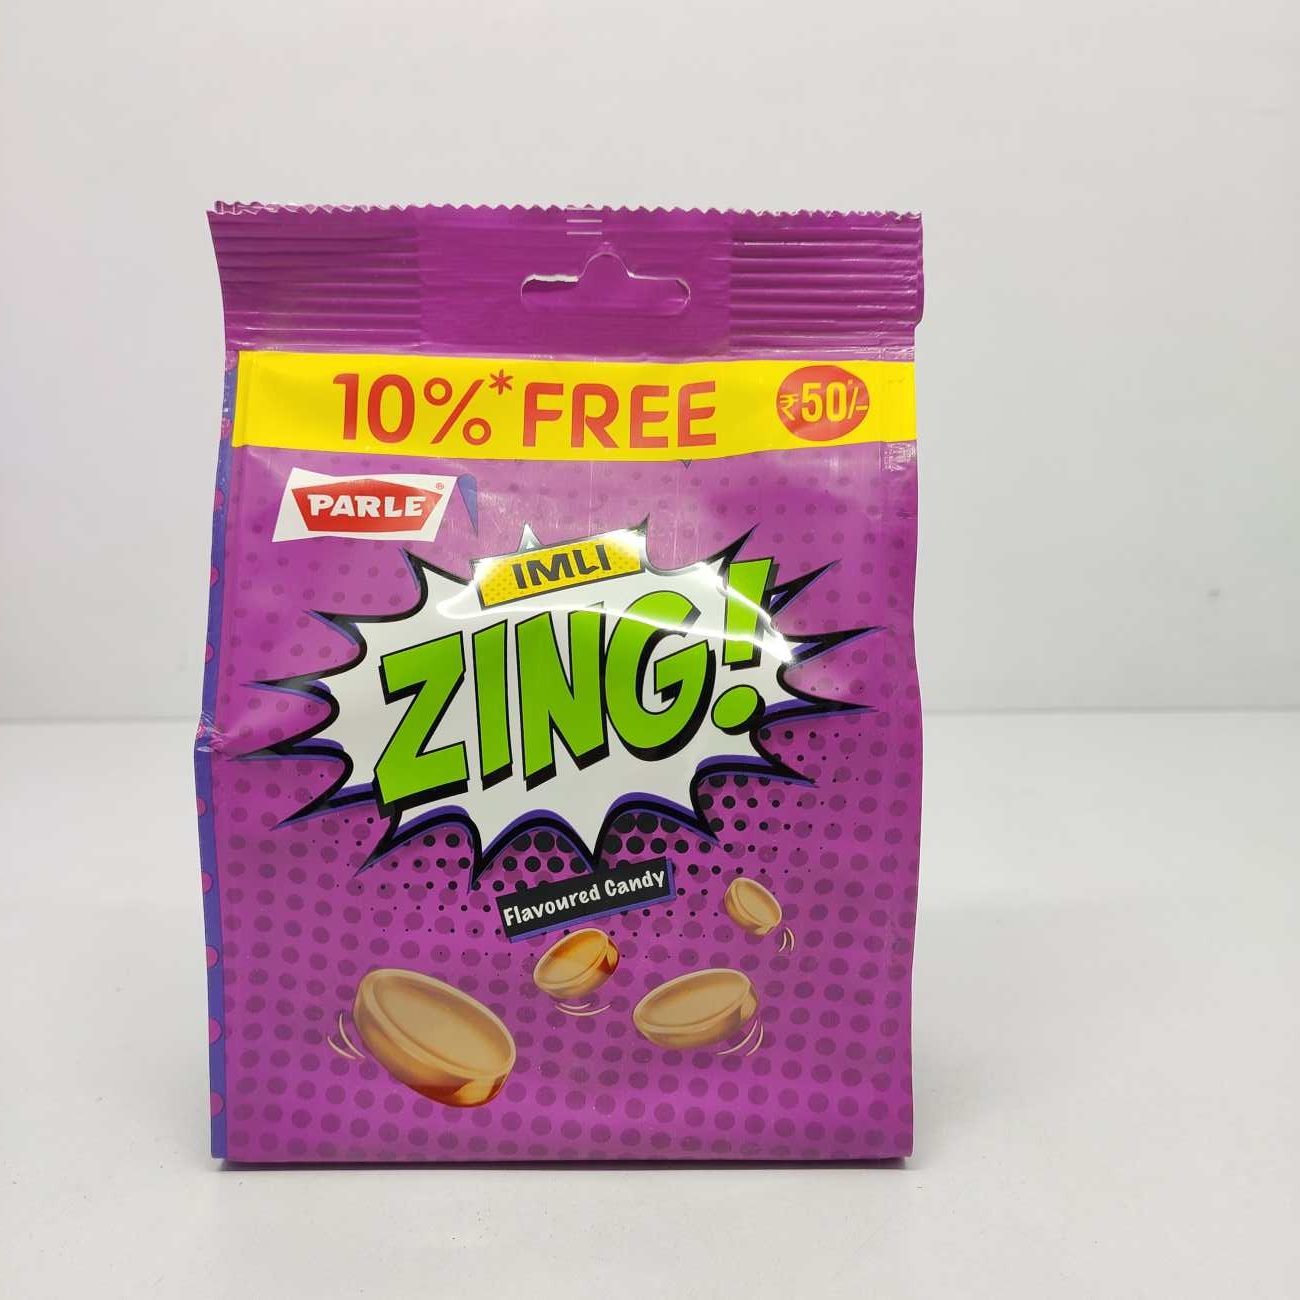 Parle imli Zing flavour candy, 217.8 grams